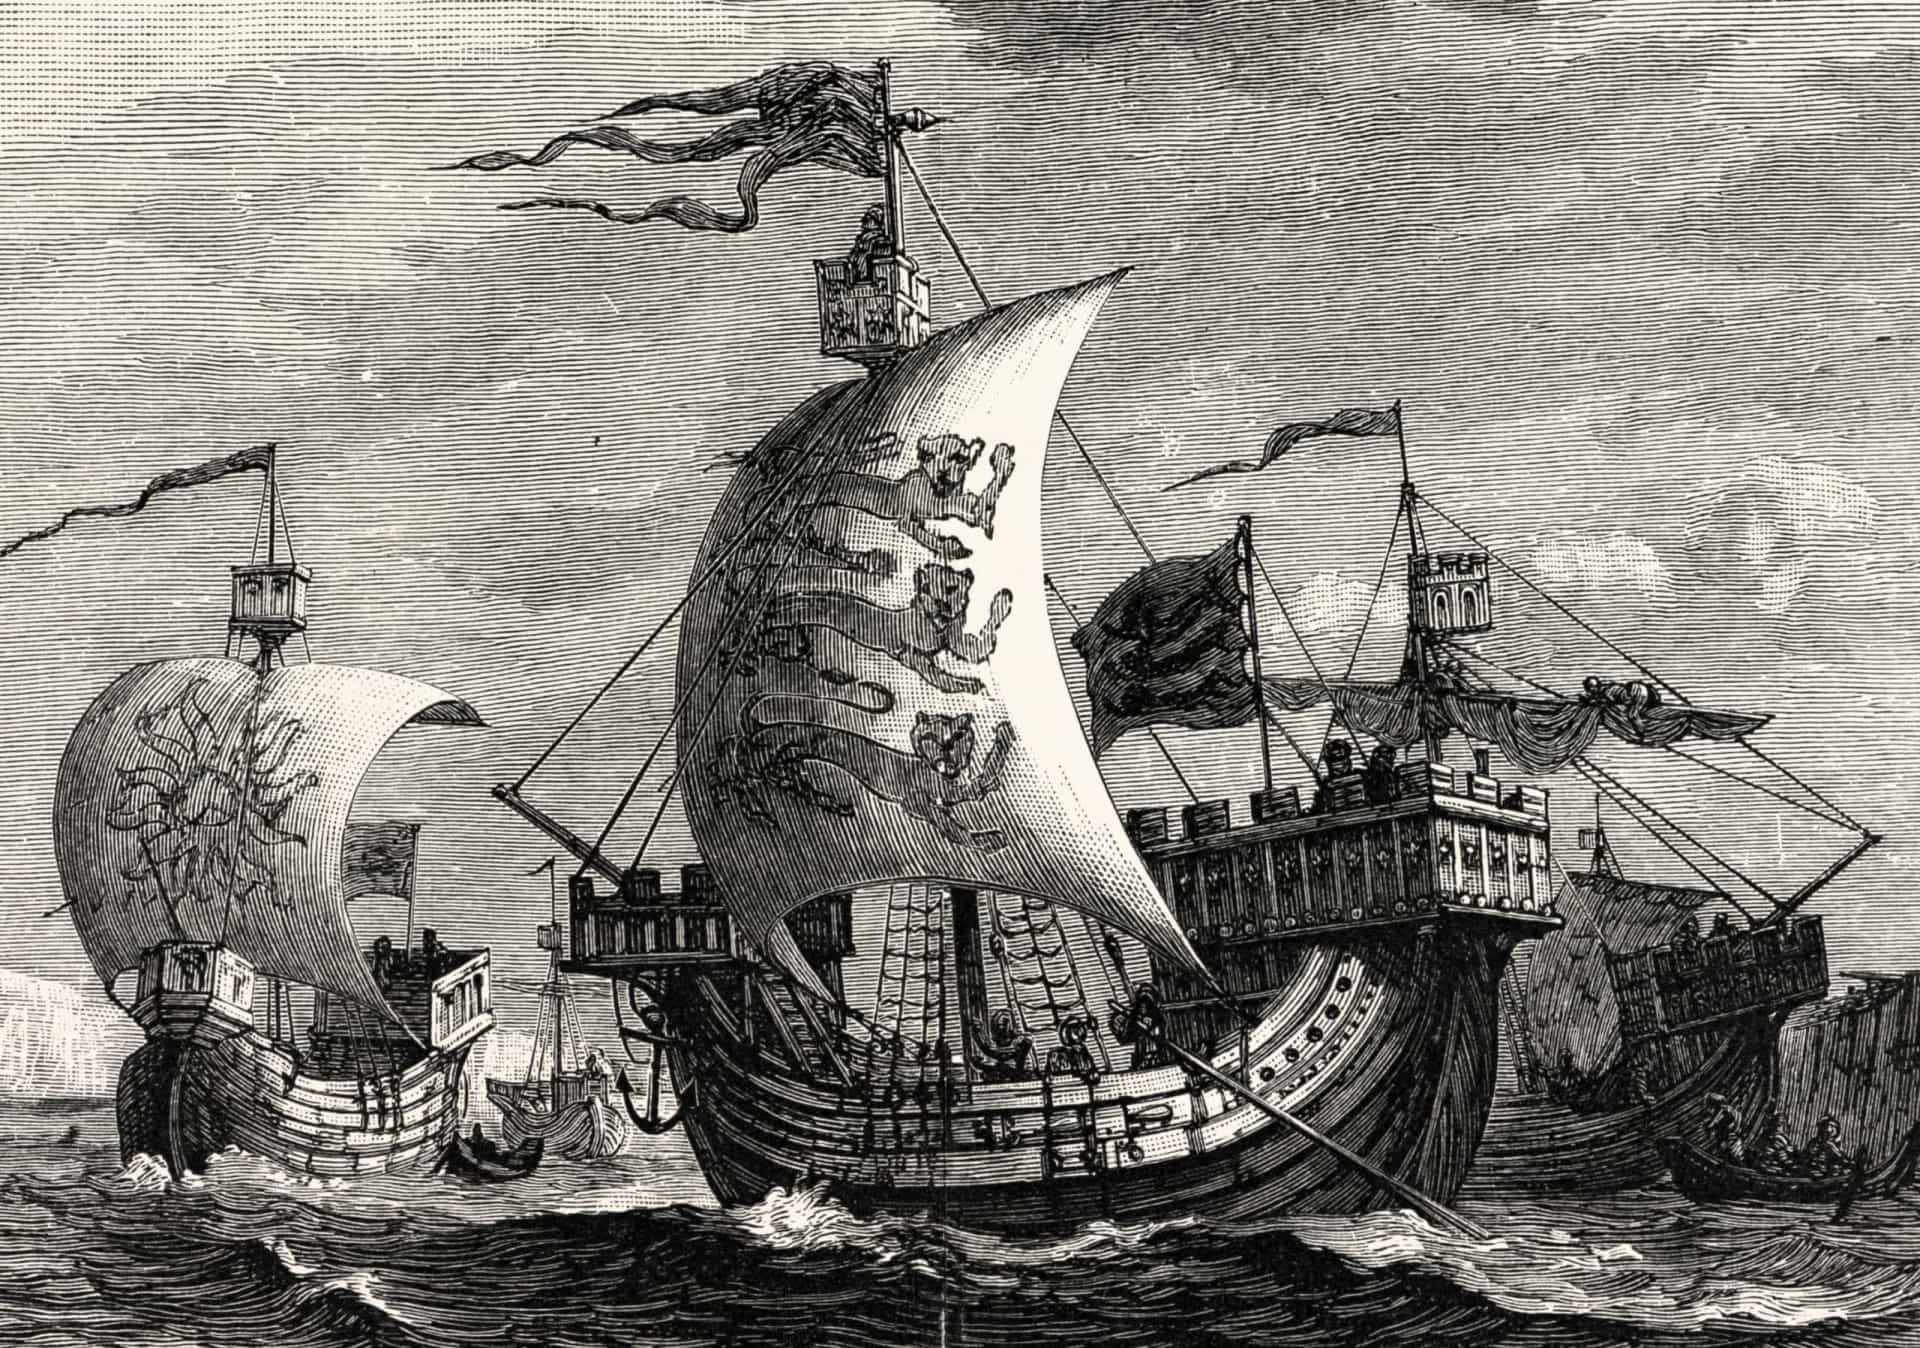 <p>In 1349, an English ship unintentionally brought <em>Yersinia pestis</em> to Norway when it became stranded in Bergen. The crew perished, infecting the locals. The disease quickly spread to Denmark and Sweden.</p>